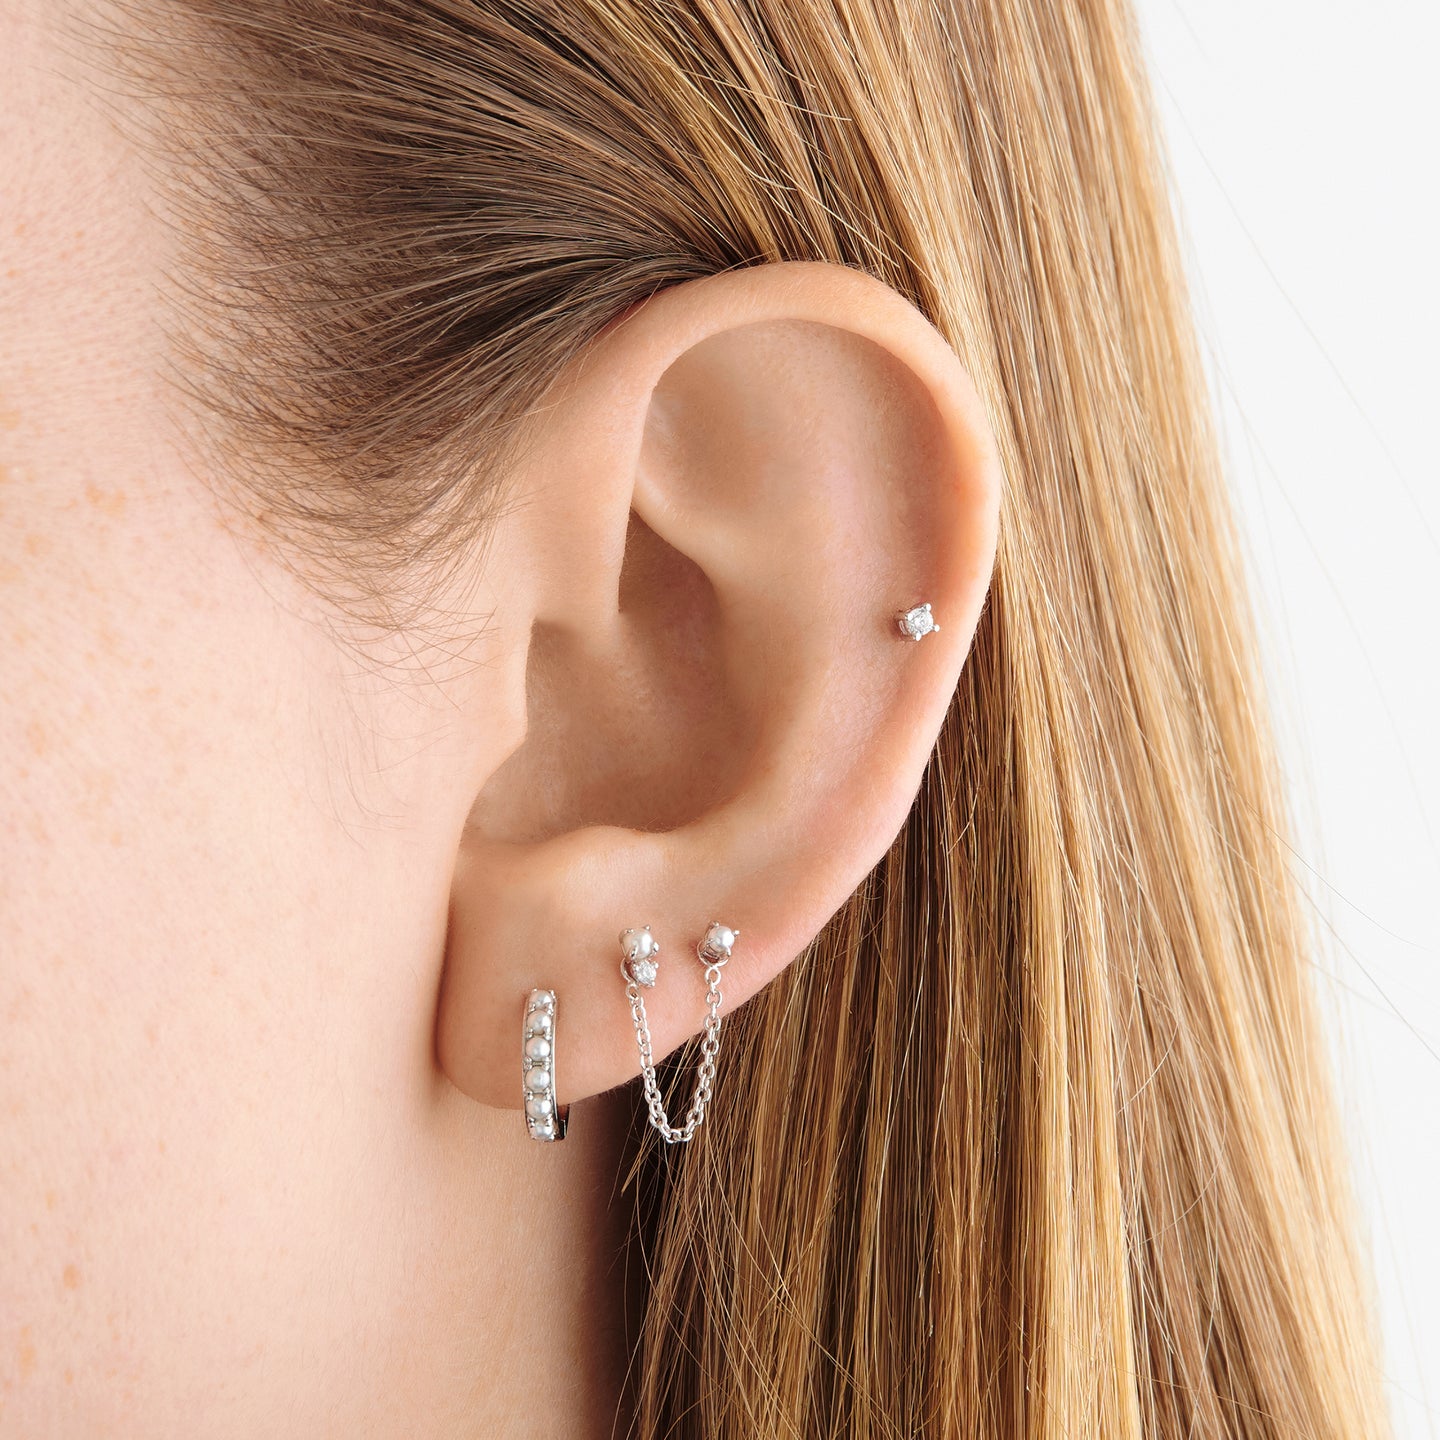 This is a small silver huggie that has small pearls lining the front of it on ear [hover] color:null|silver